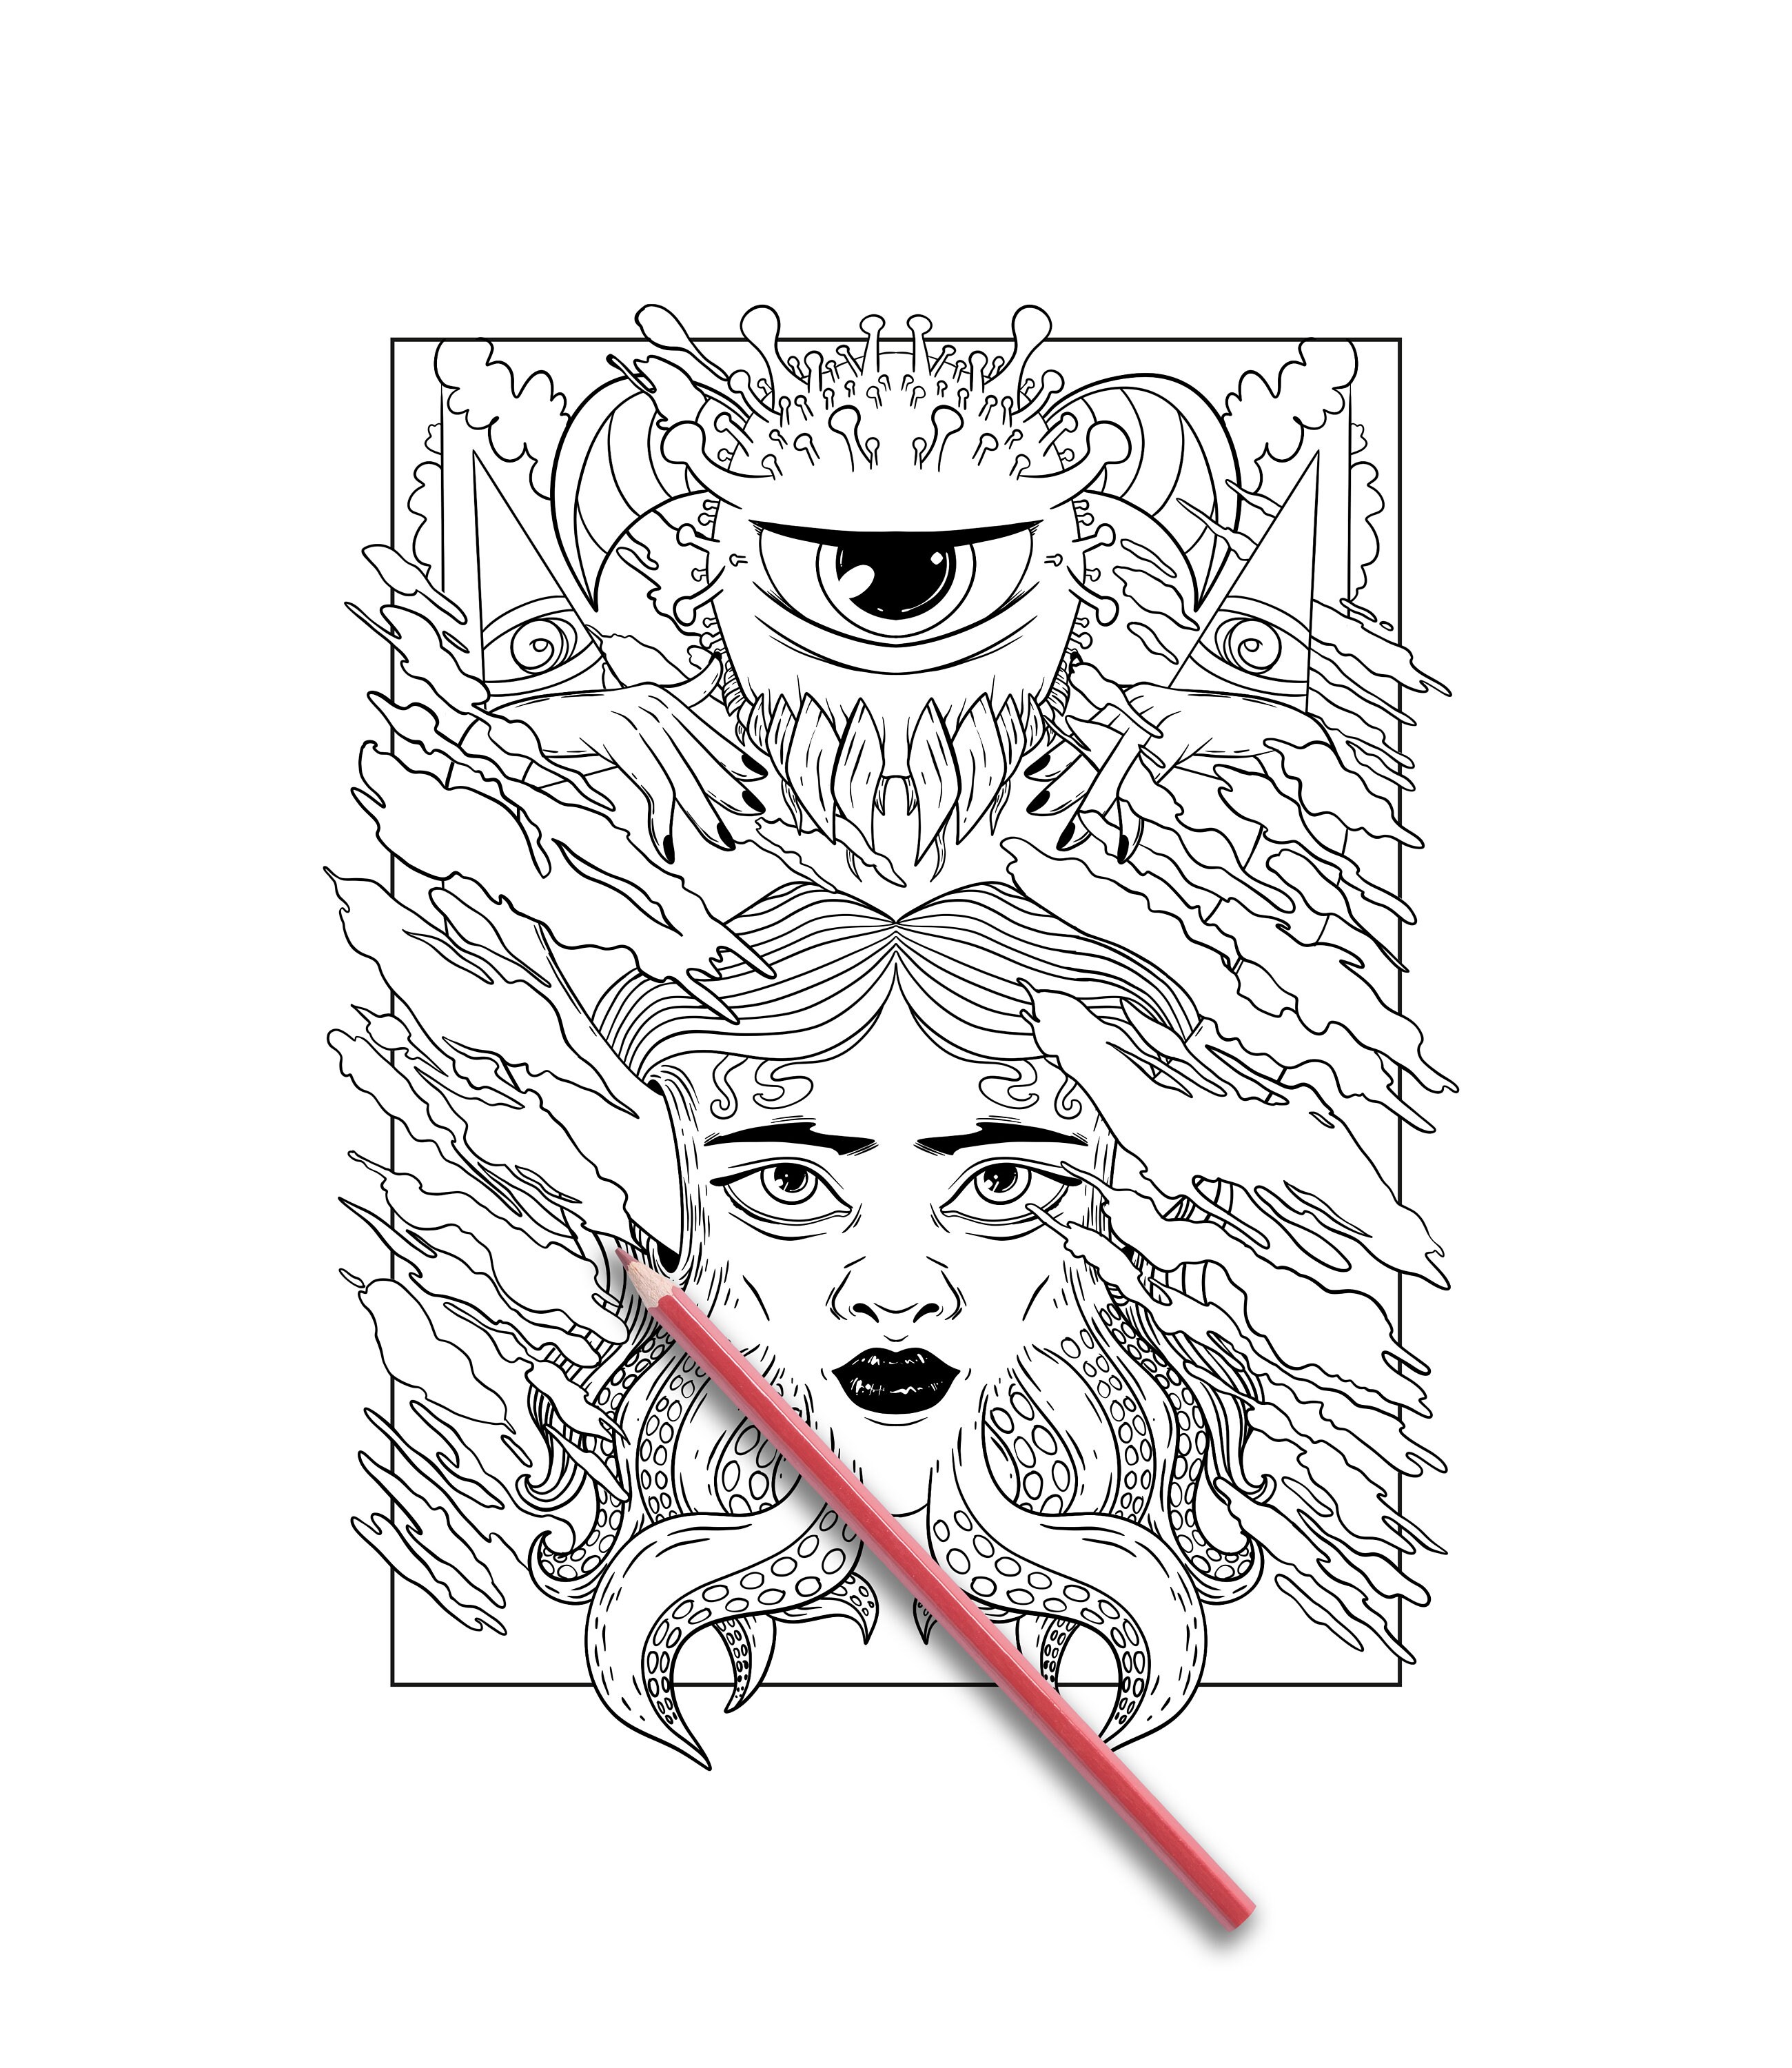 Stoner Coloring Book, Adult Coloring Book, Let's Get High and Color,  Digital Download 